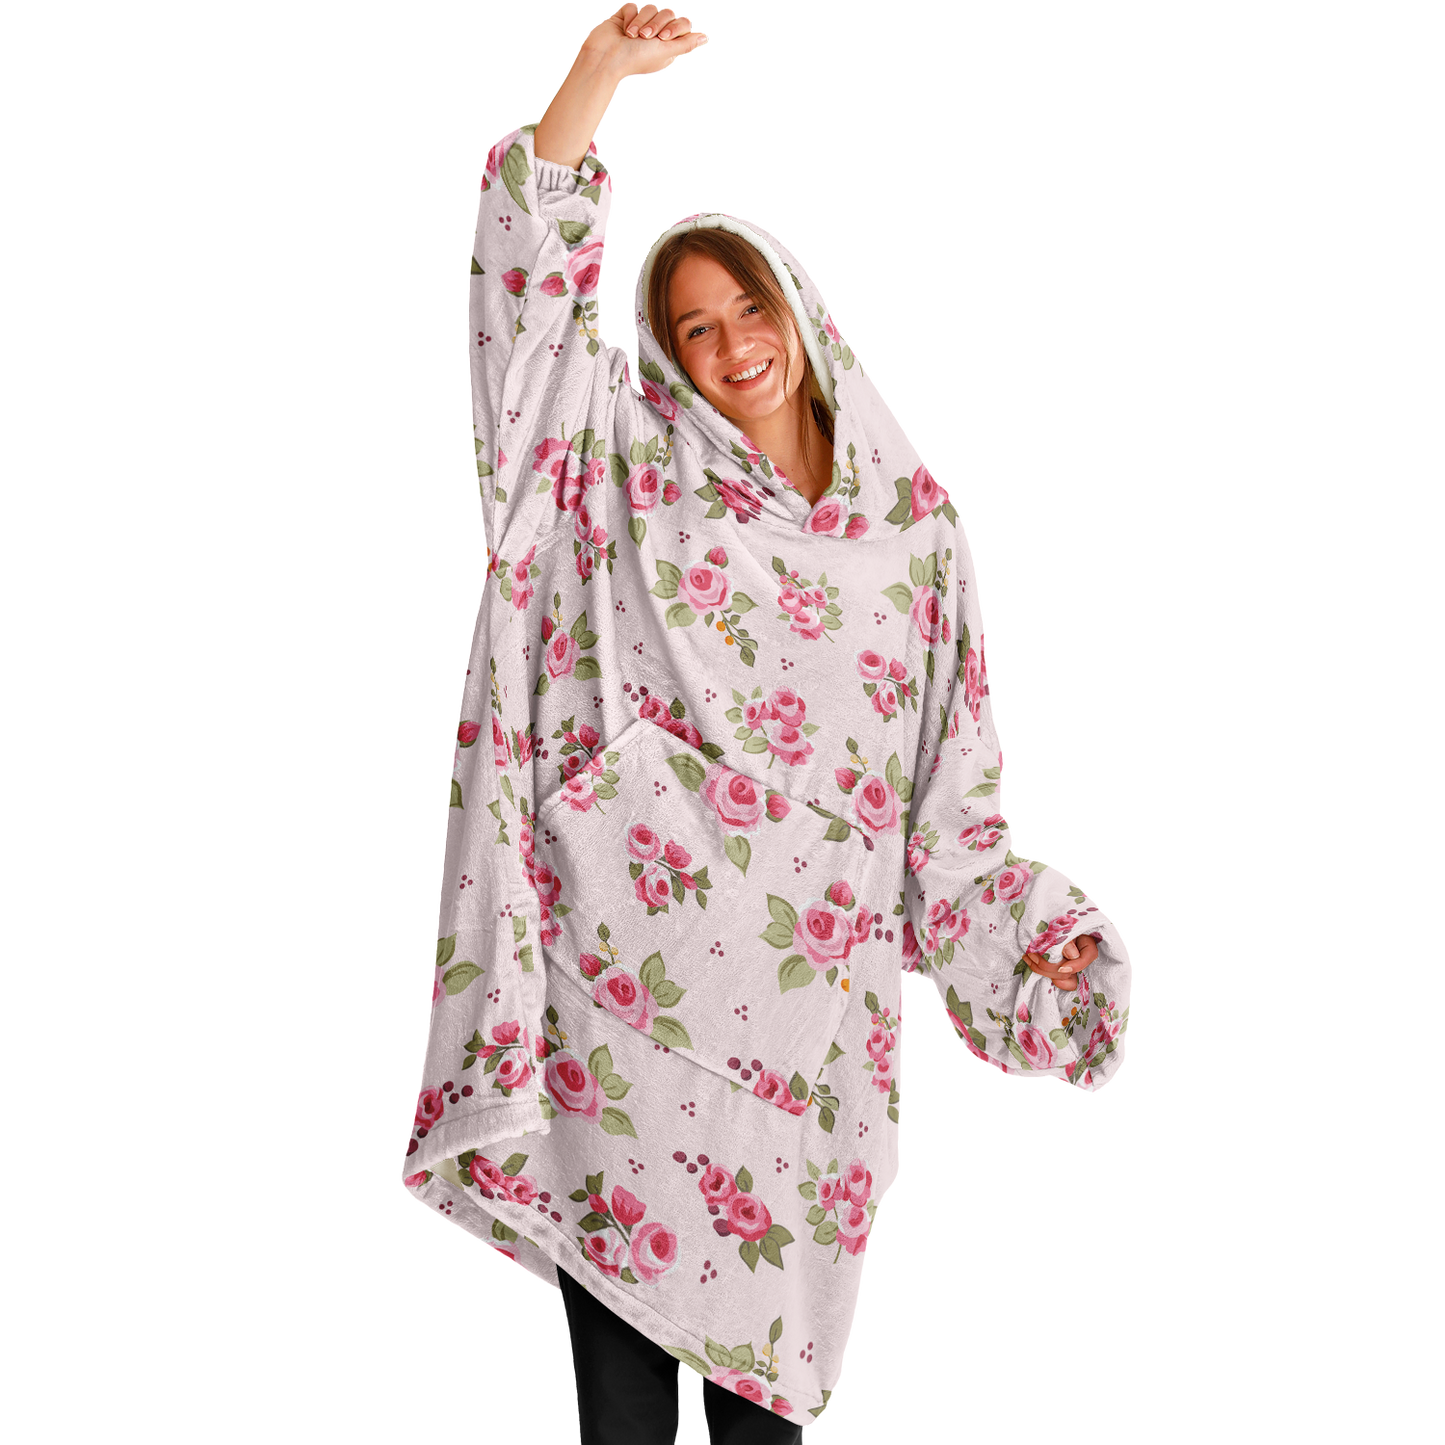 Coquette Hooded Blanket Perfect for Valentine's Day, Galentine's Day, Birthdays or Anniversaries